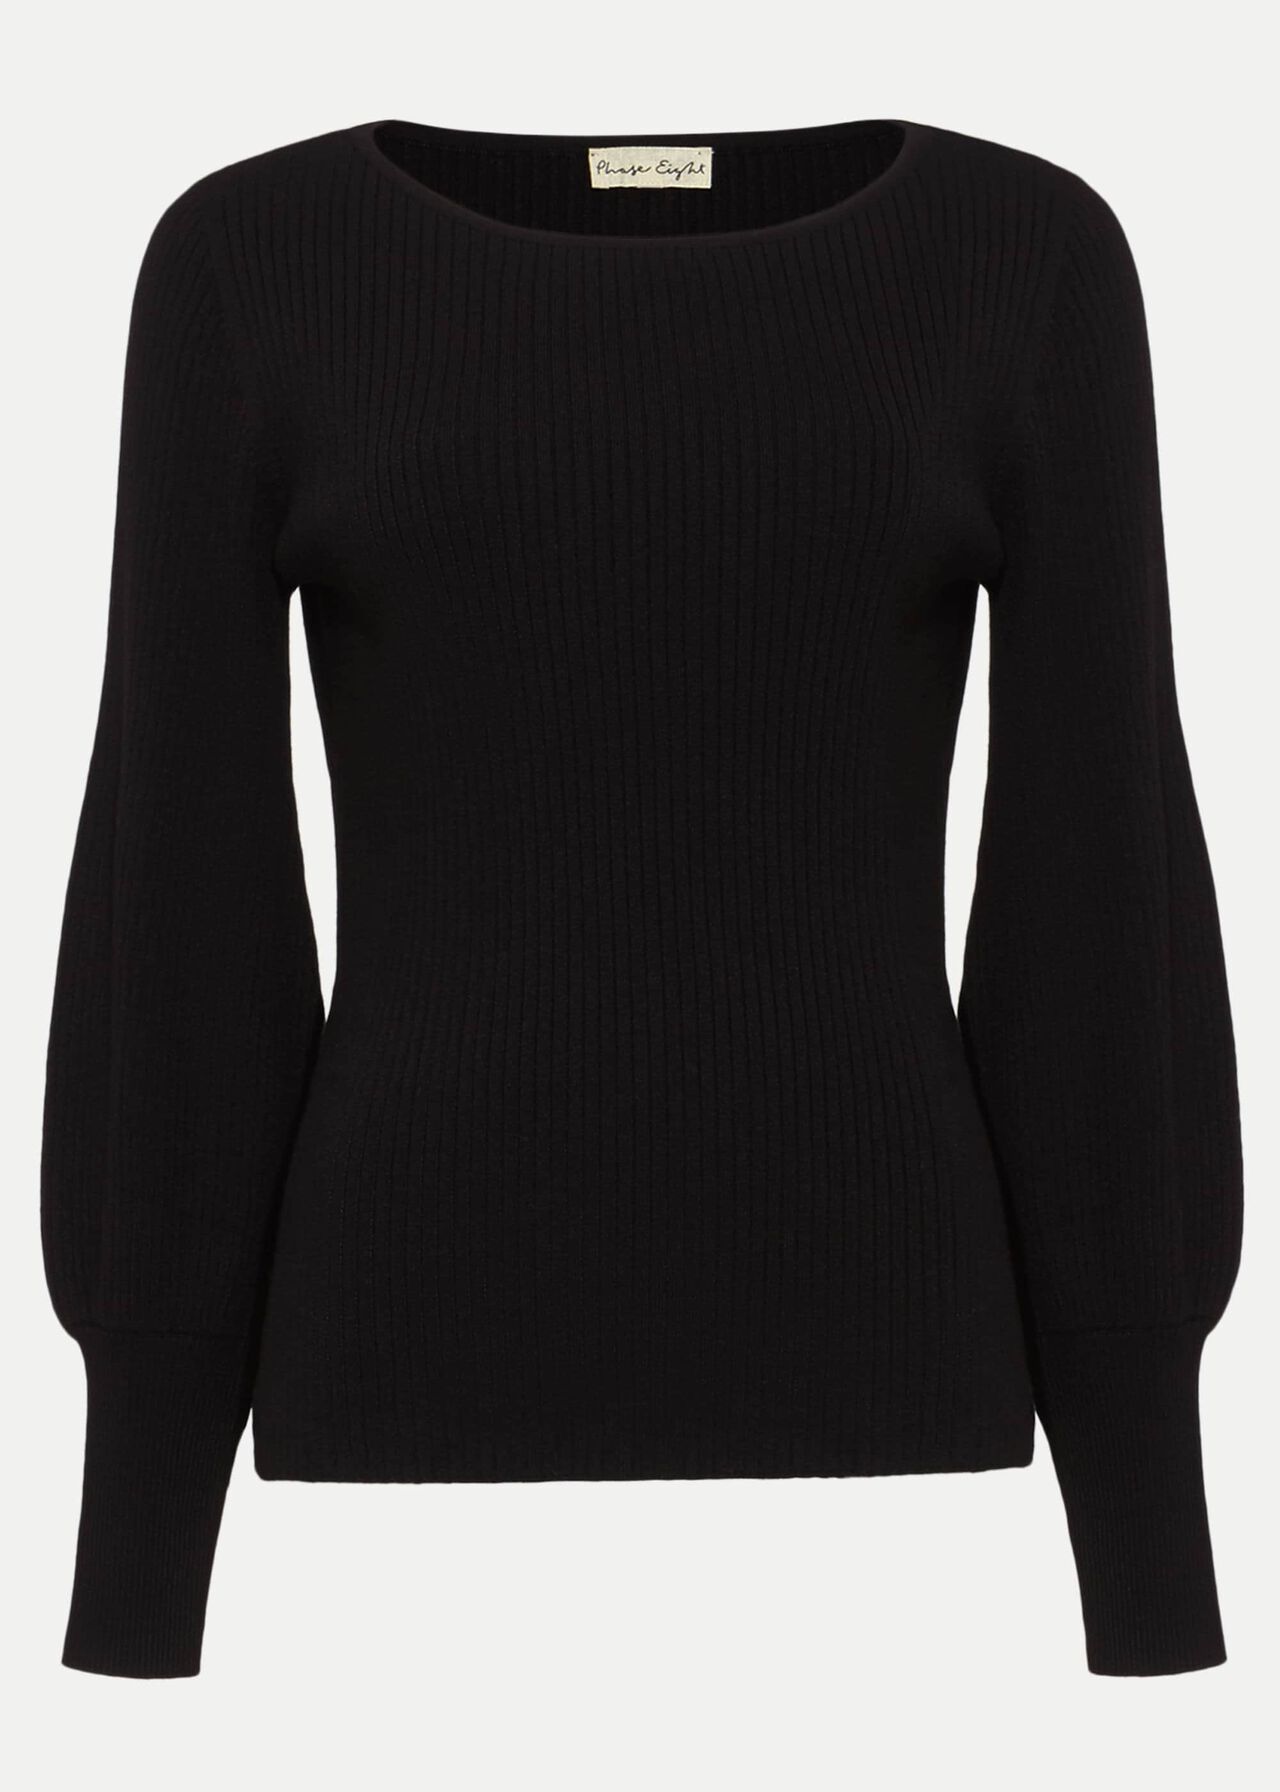 Maria Full Sleeve Knitted Top